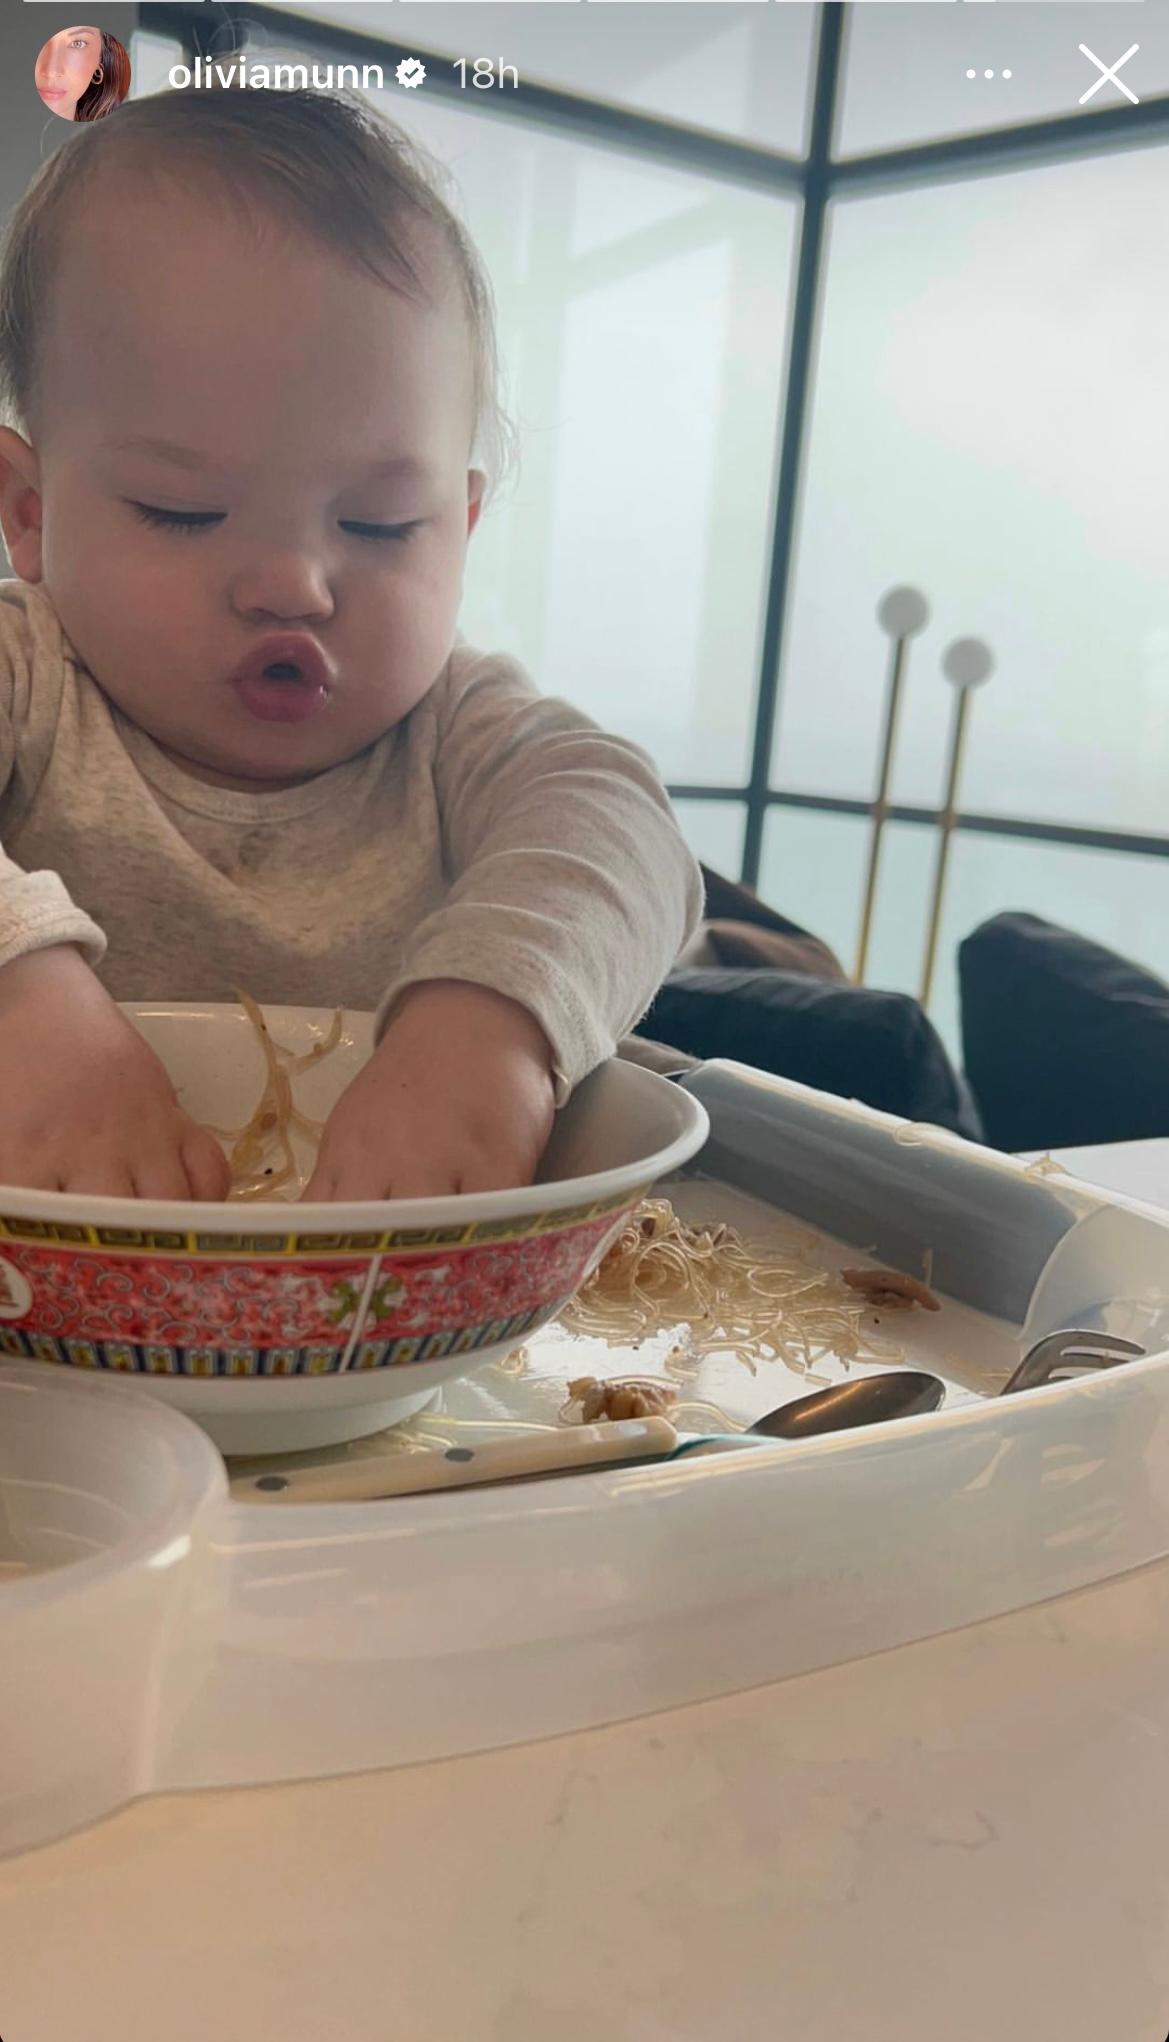 Olivia Munn and son Malcolm celebrate Lunar New Year